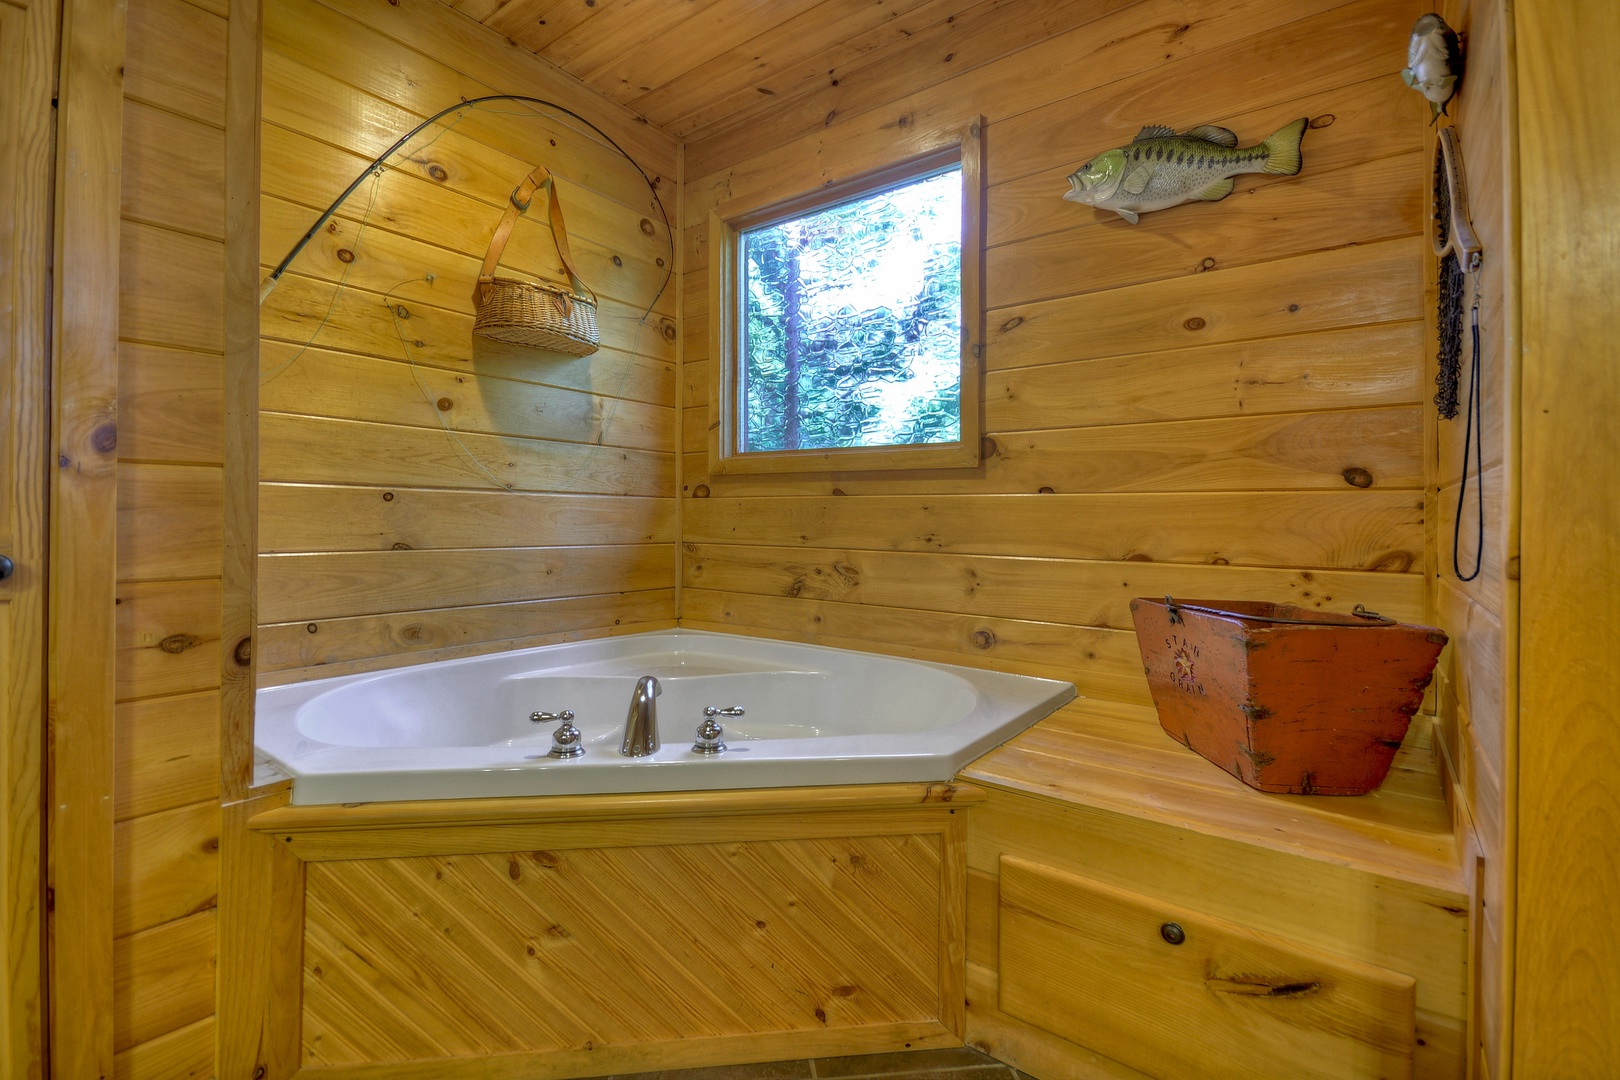 Grand Mountain Lodge- Entry level master bathroom with a soaker tub